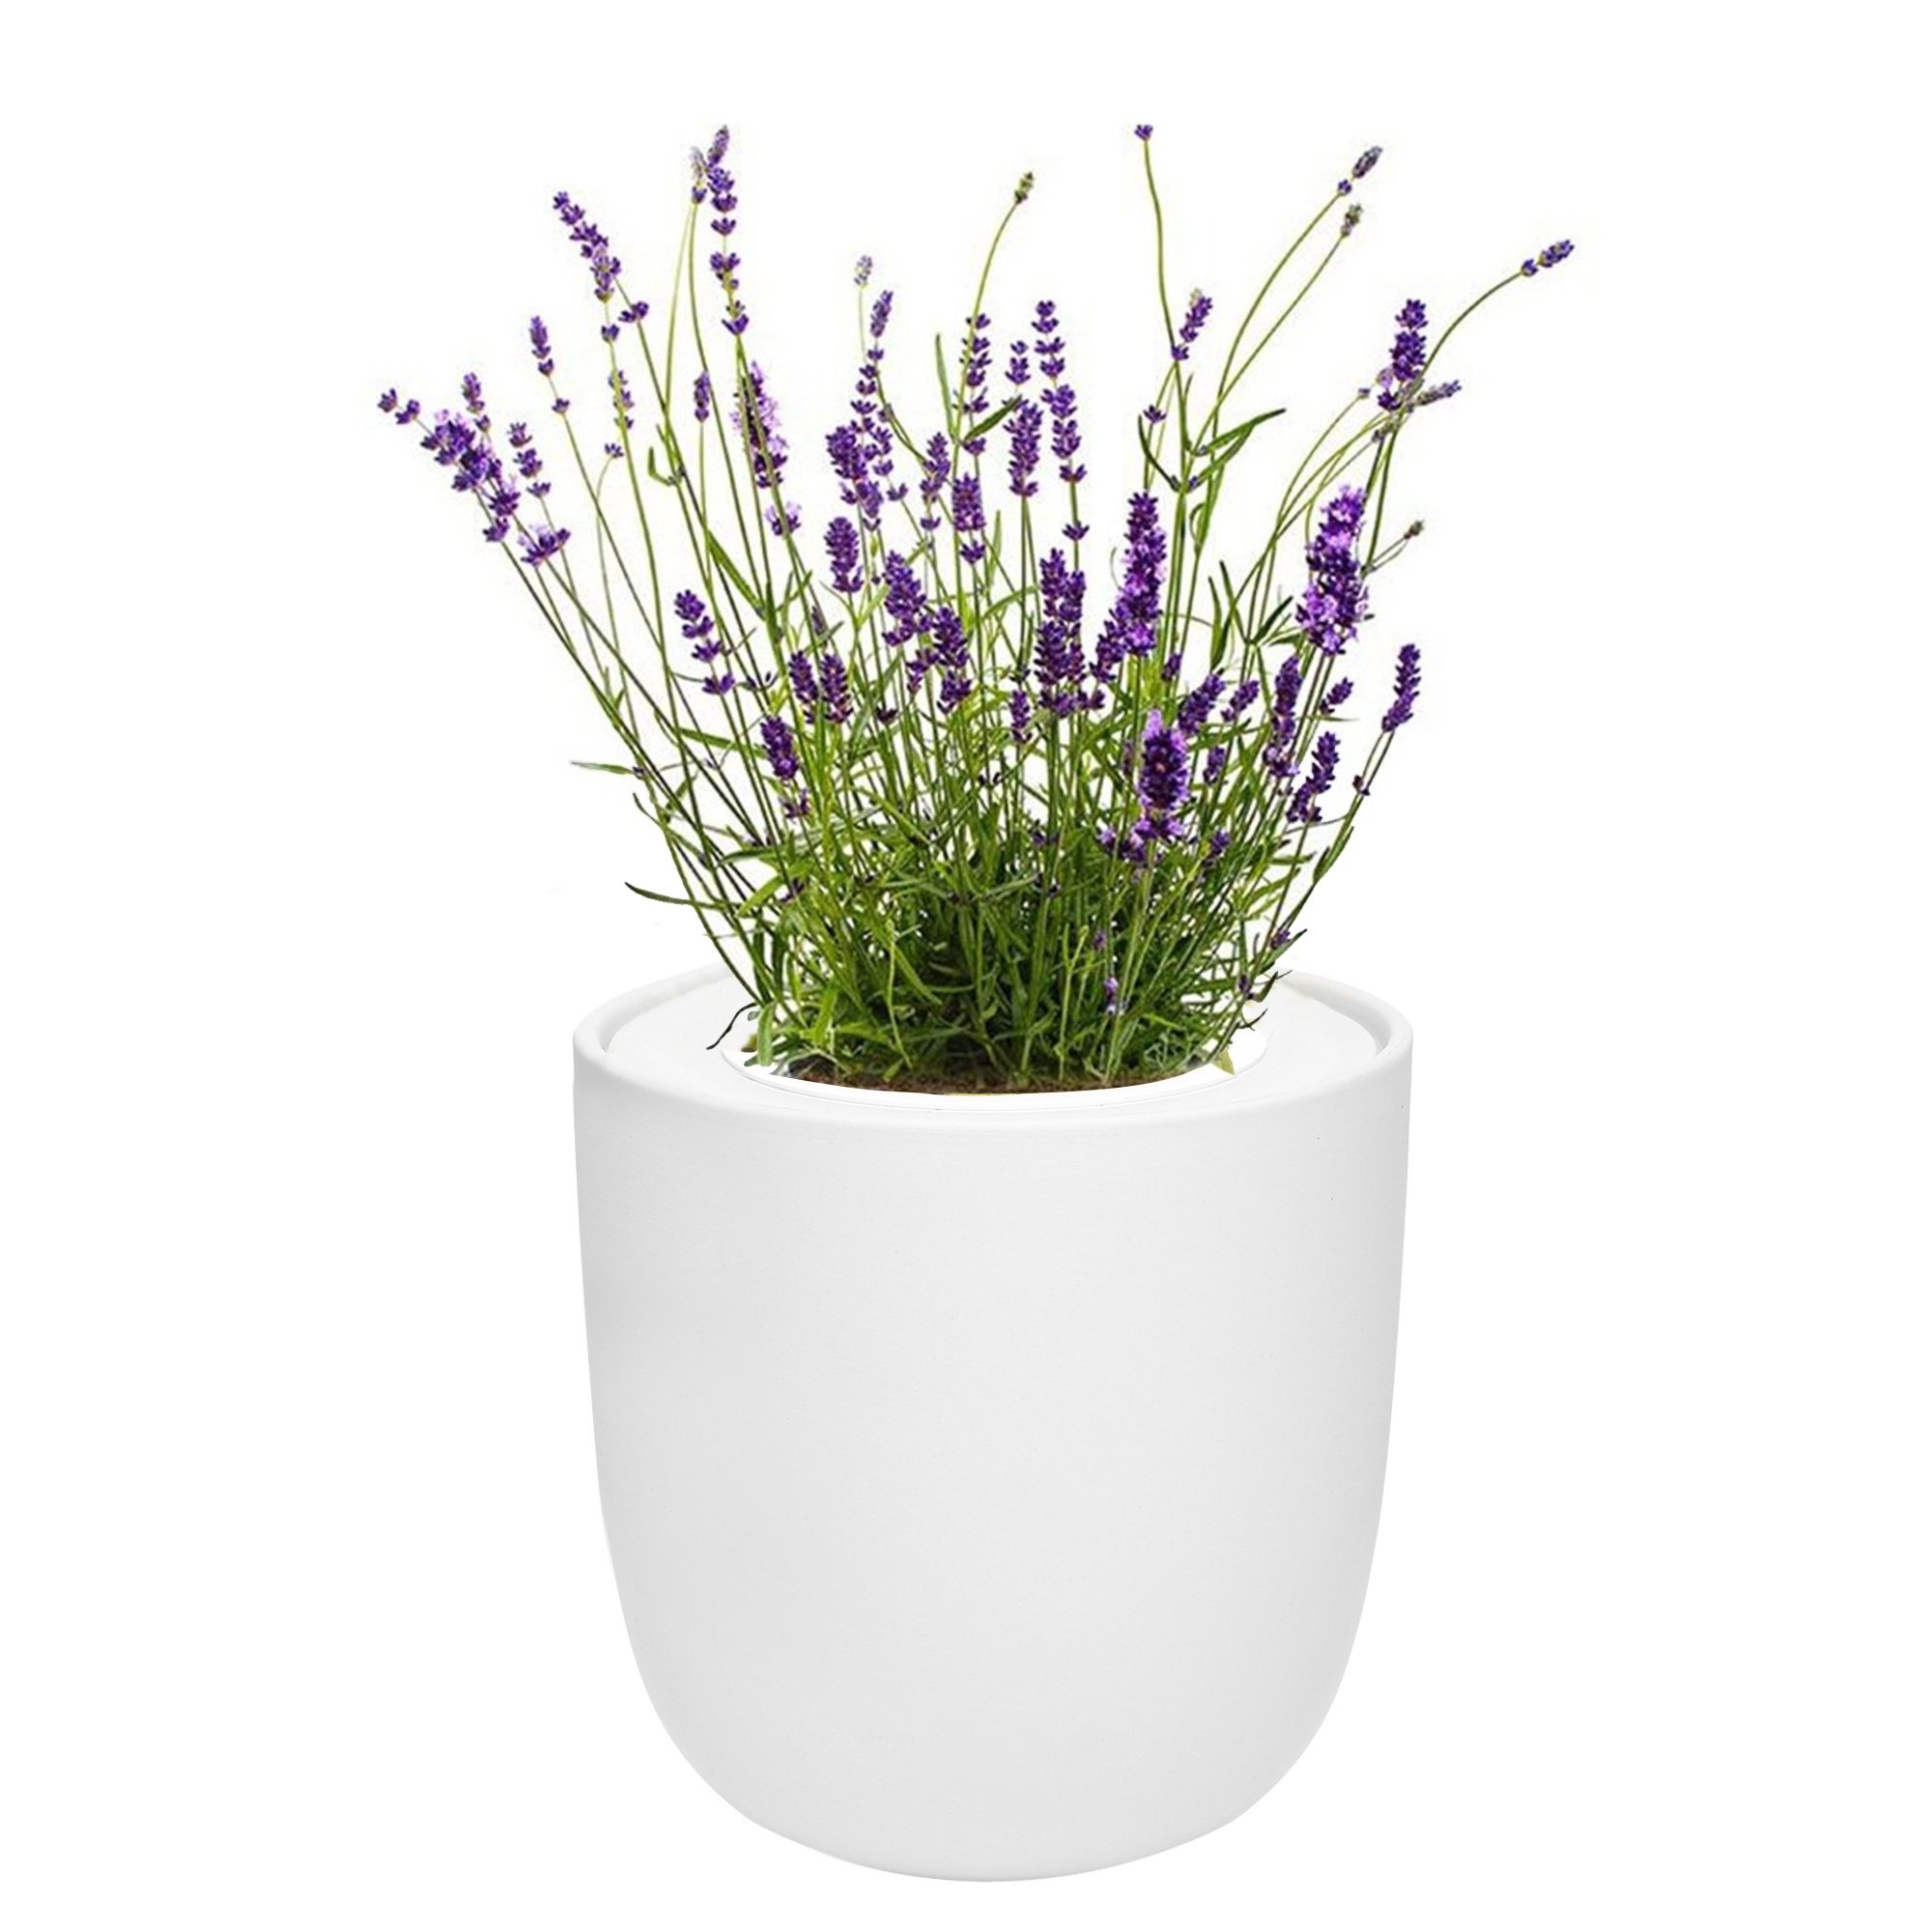 Hydroponic Herb Growing Kit with White Ceramic Pot and Seeds (Lavender)